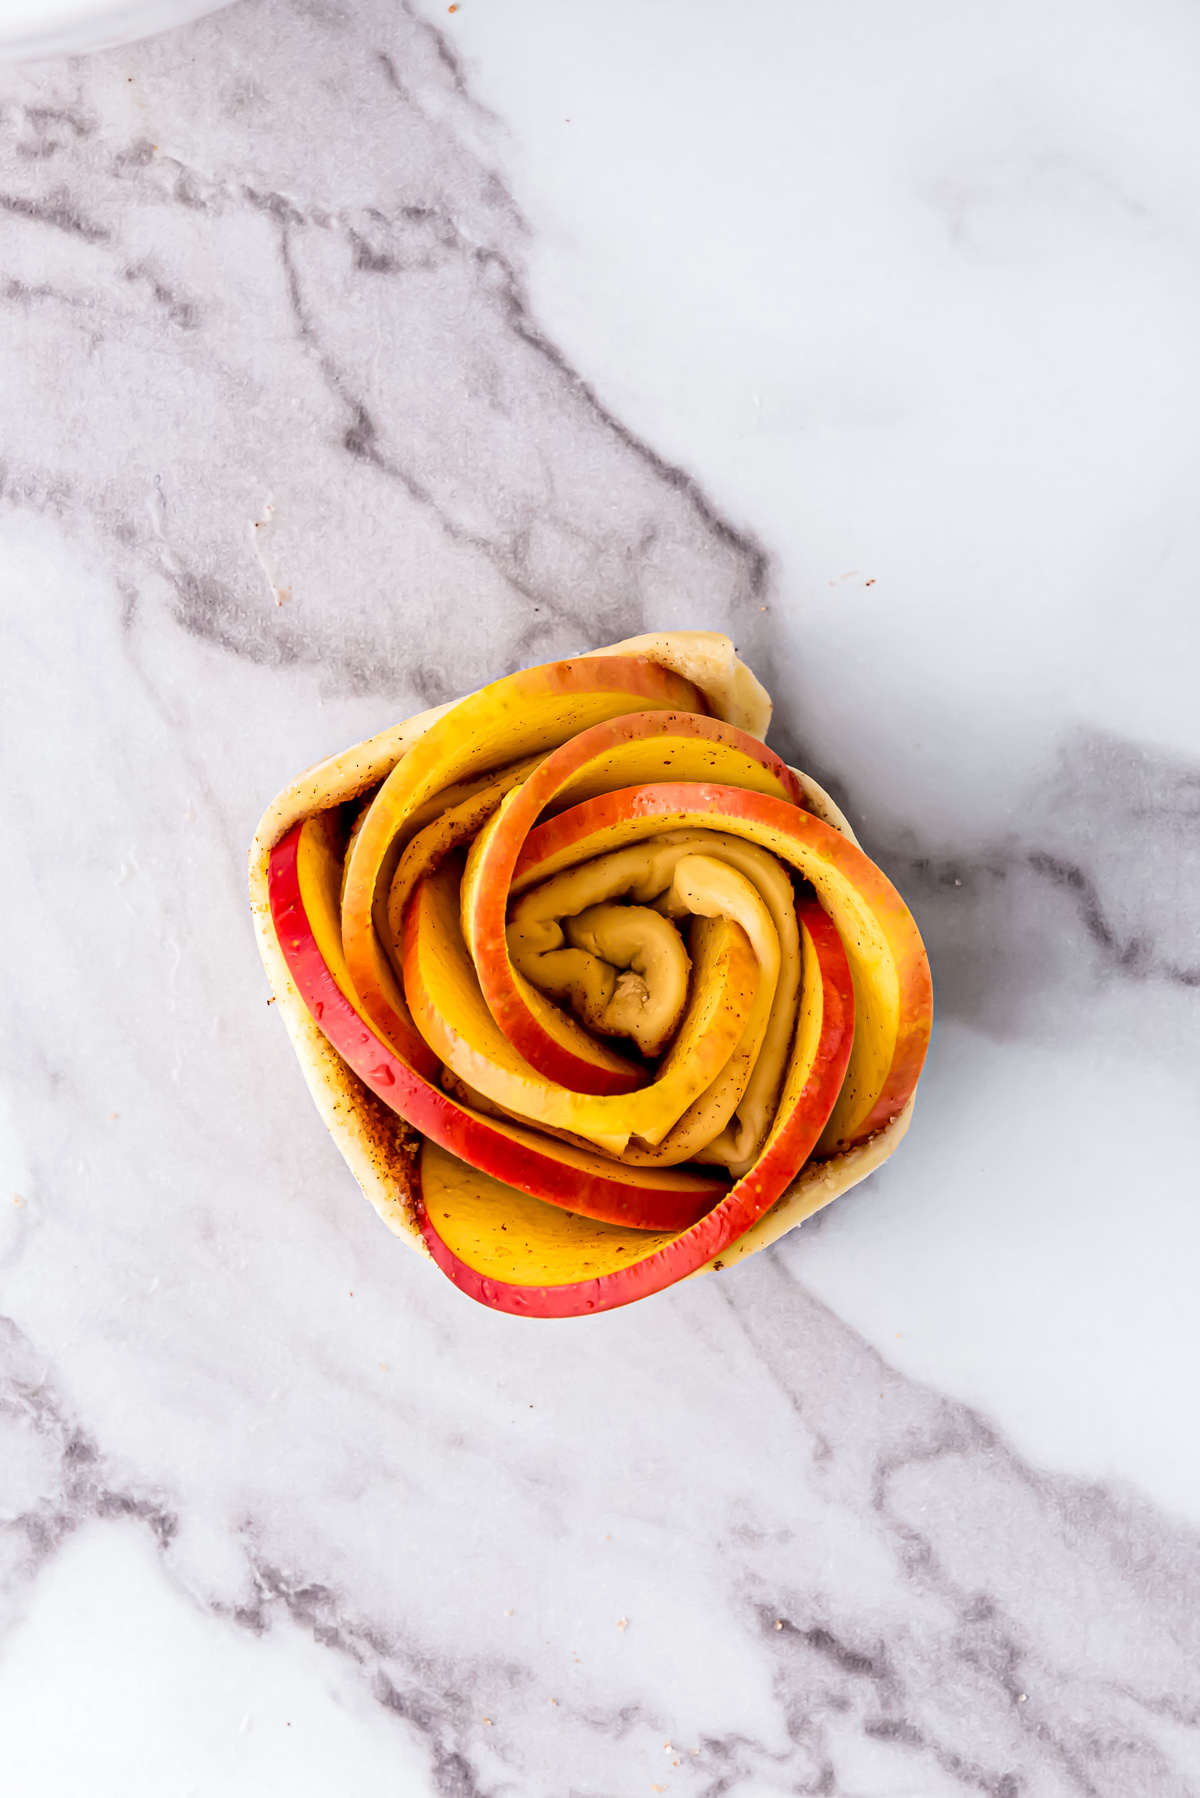 An apple rose formed and ready to be placed in a muffin tin.